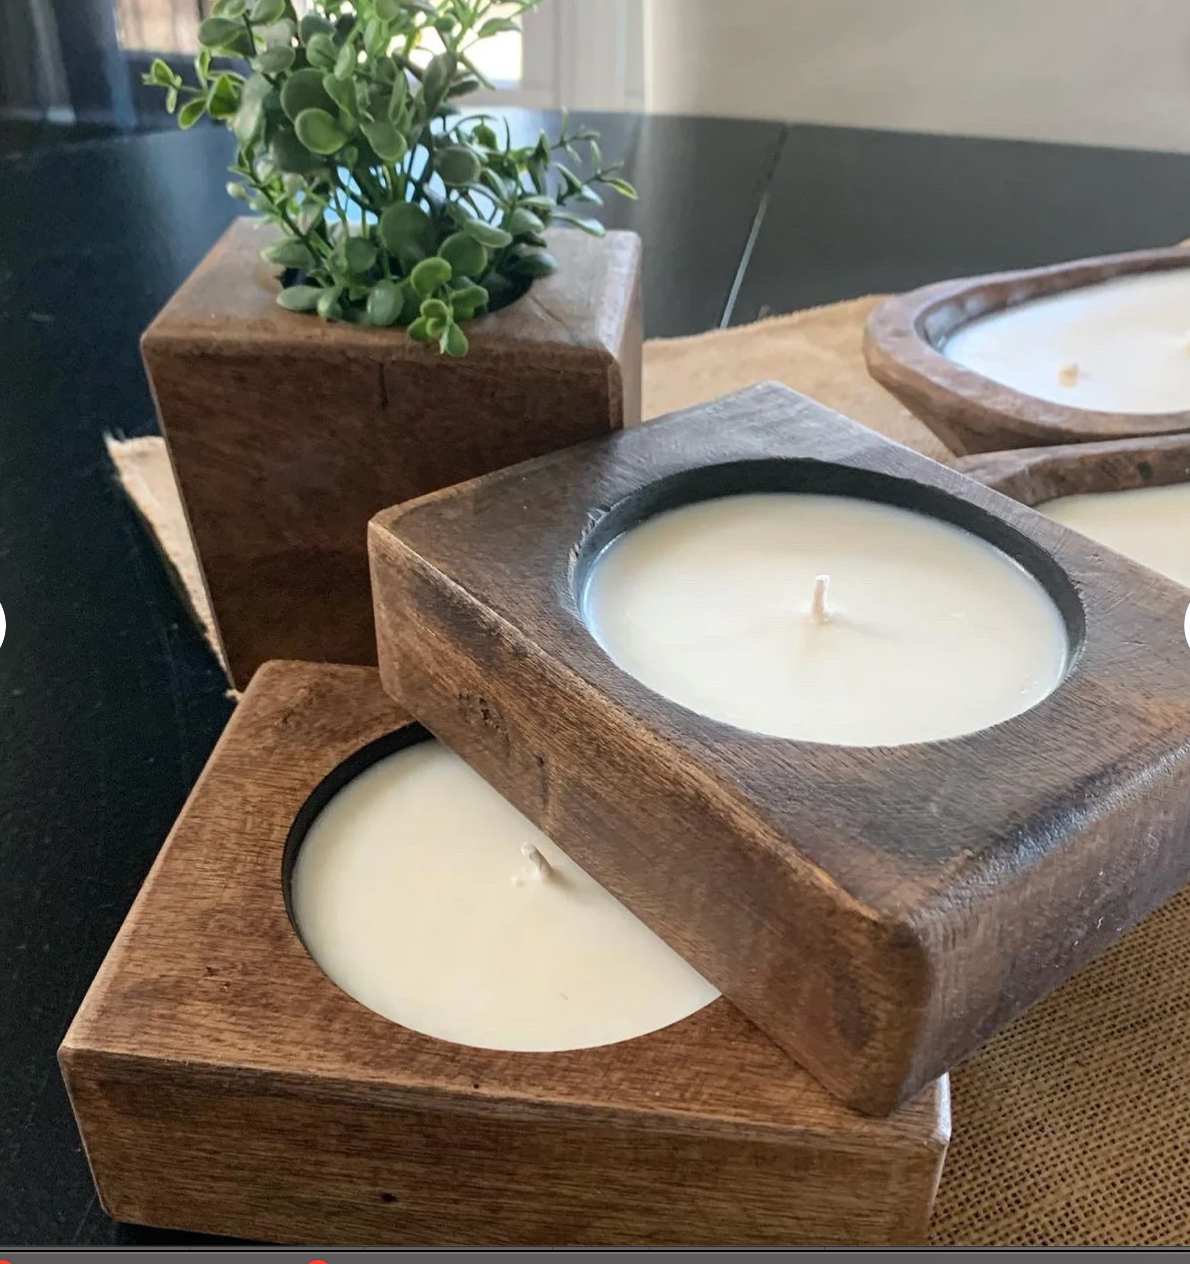 7" Cheese Mold Candles (3 Scents)